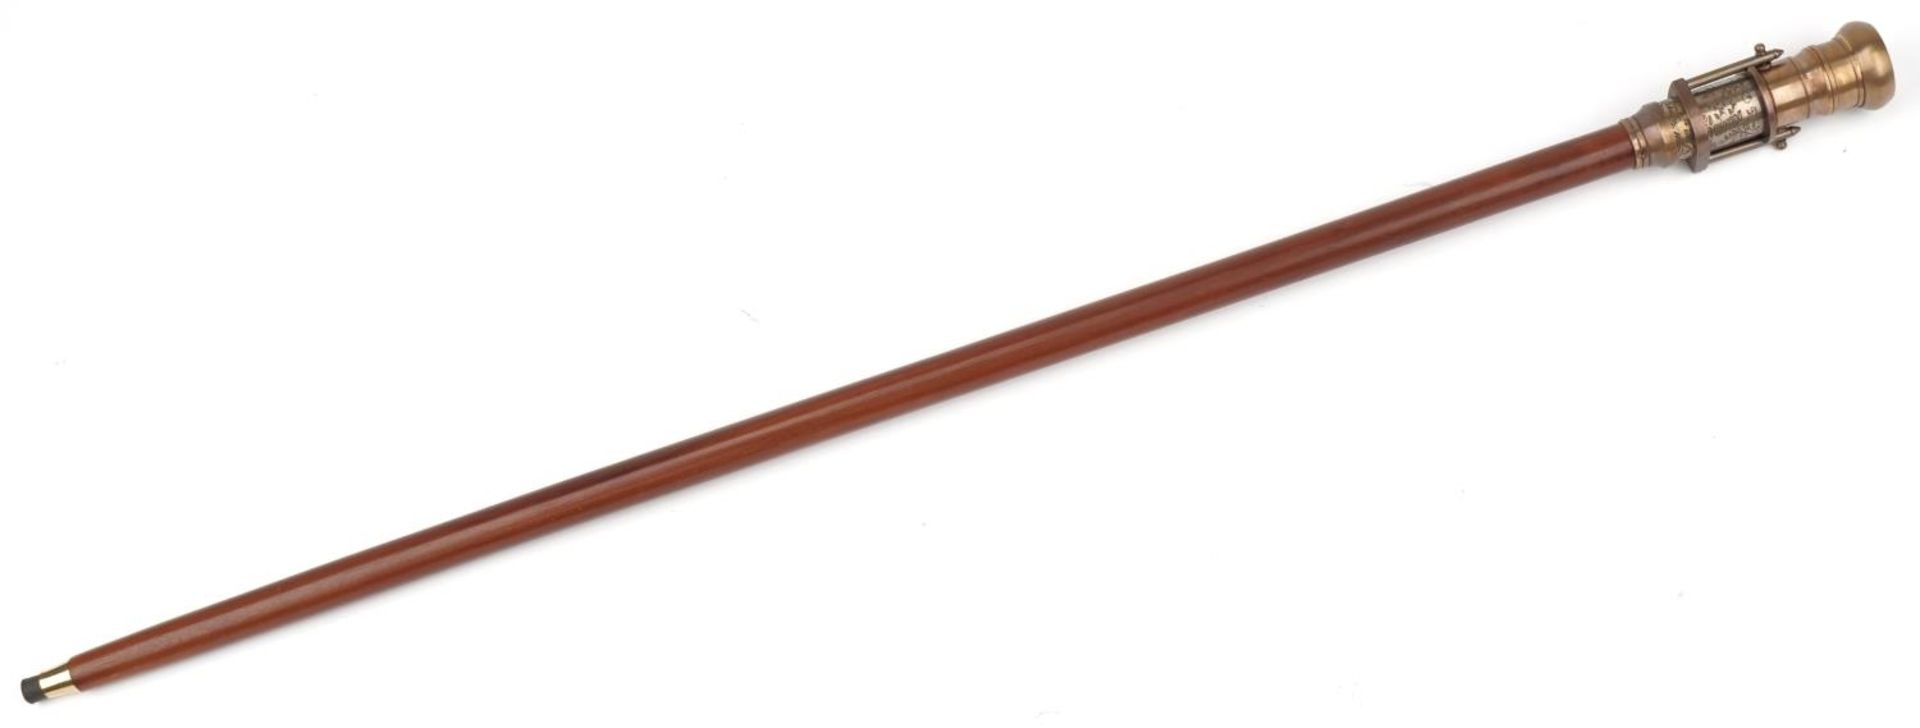 Hardwood walking stick with brass two draw telescope compass handle, 93cm in length : For further - Image 3 of 5